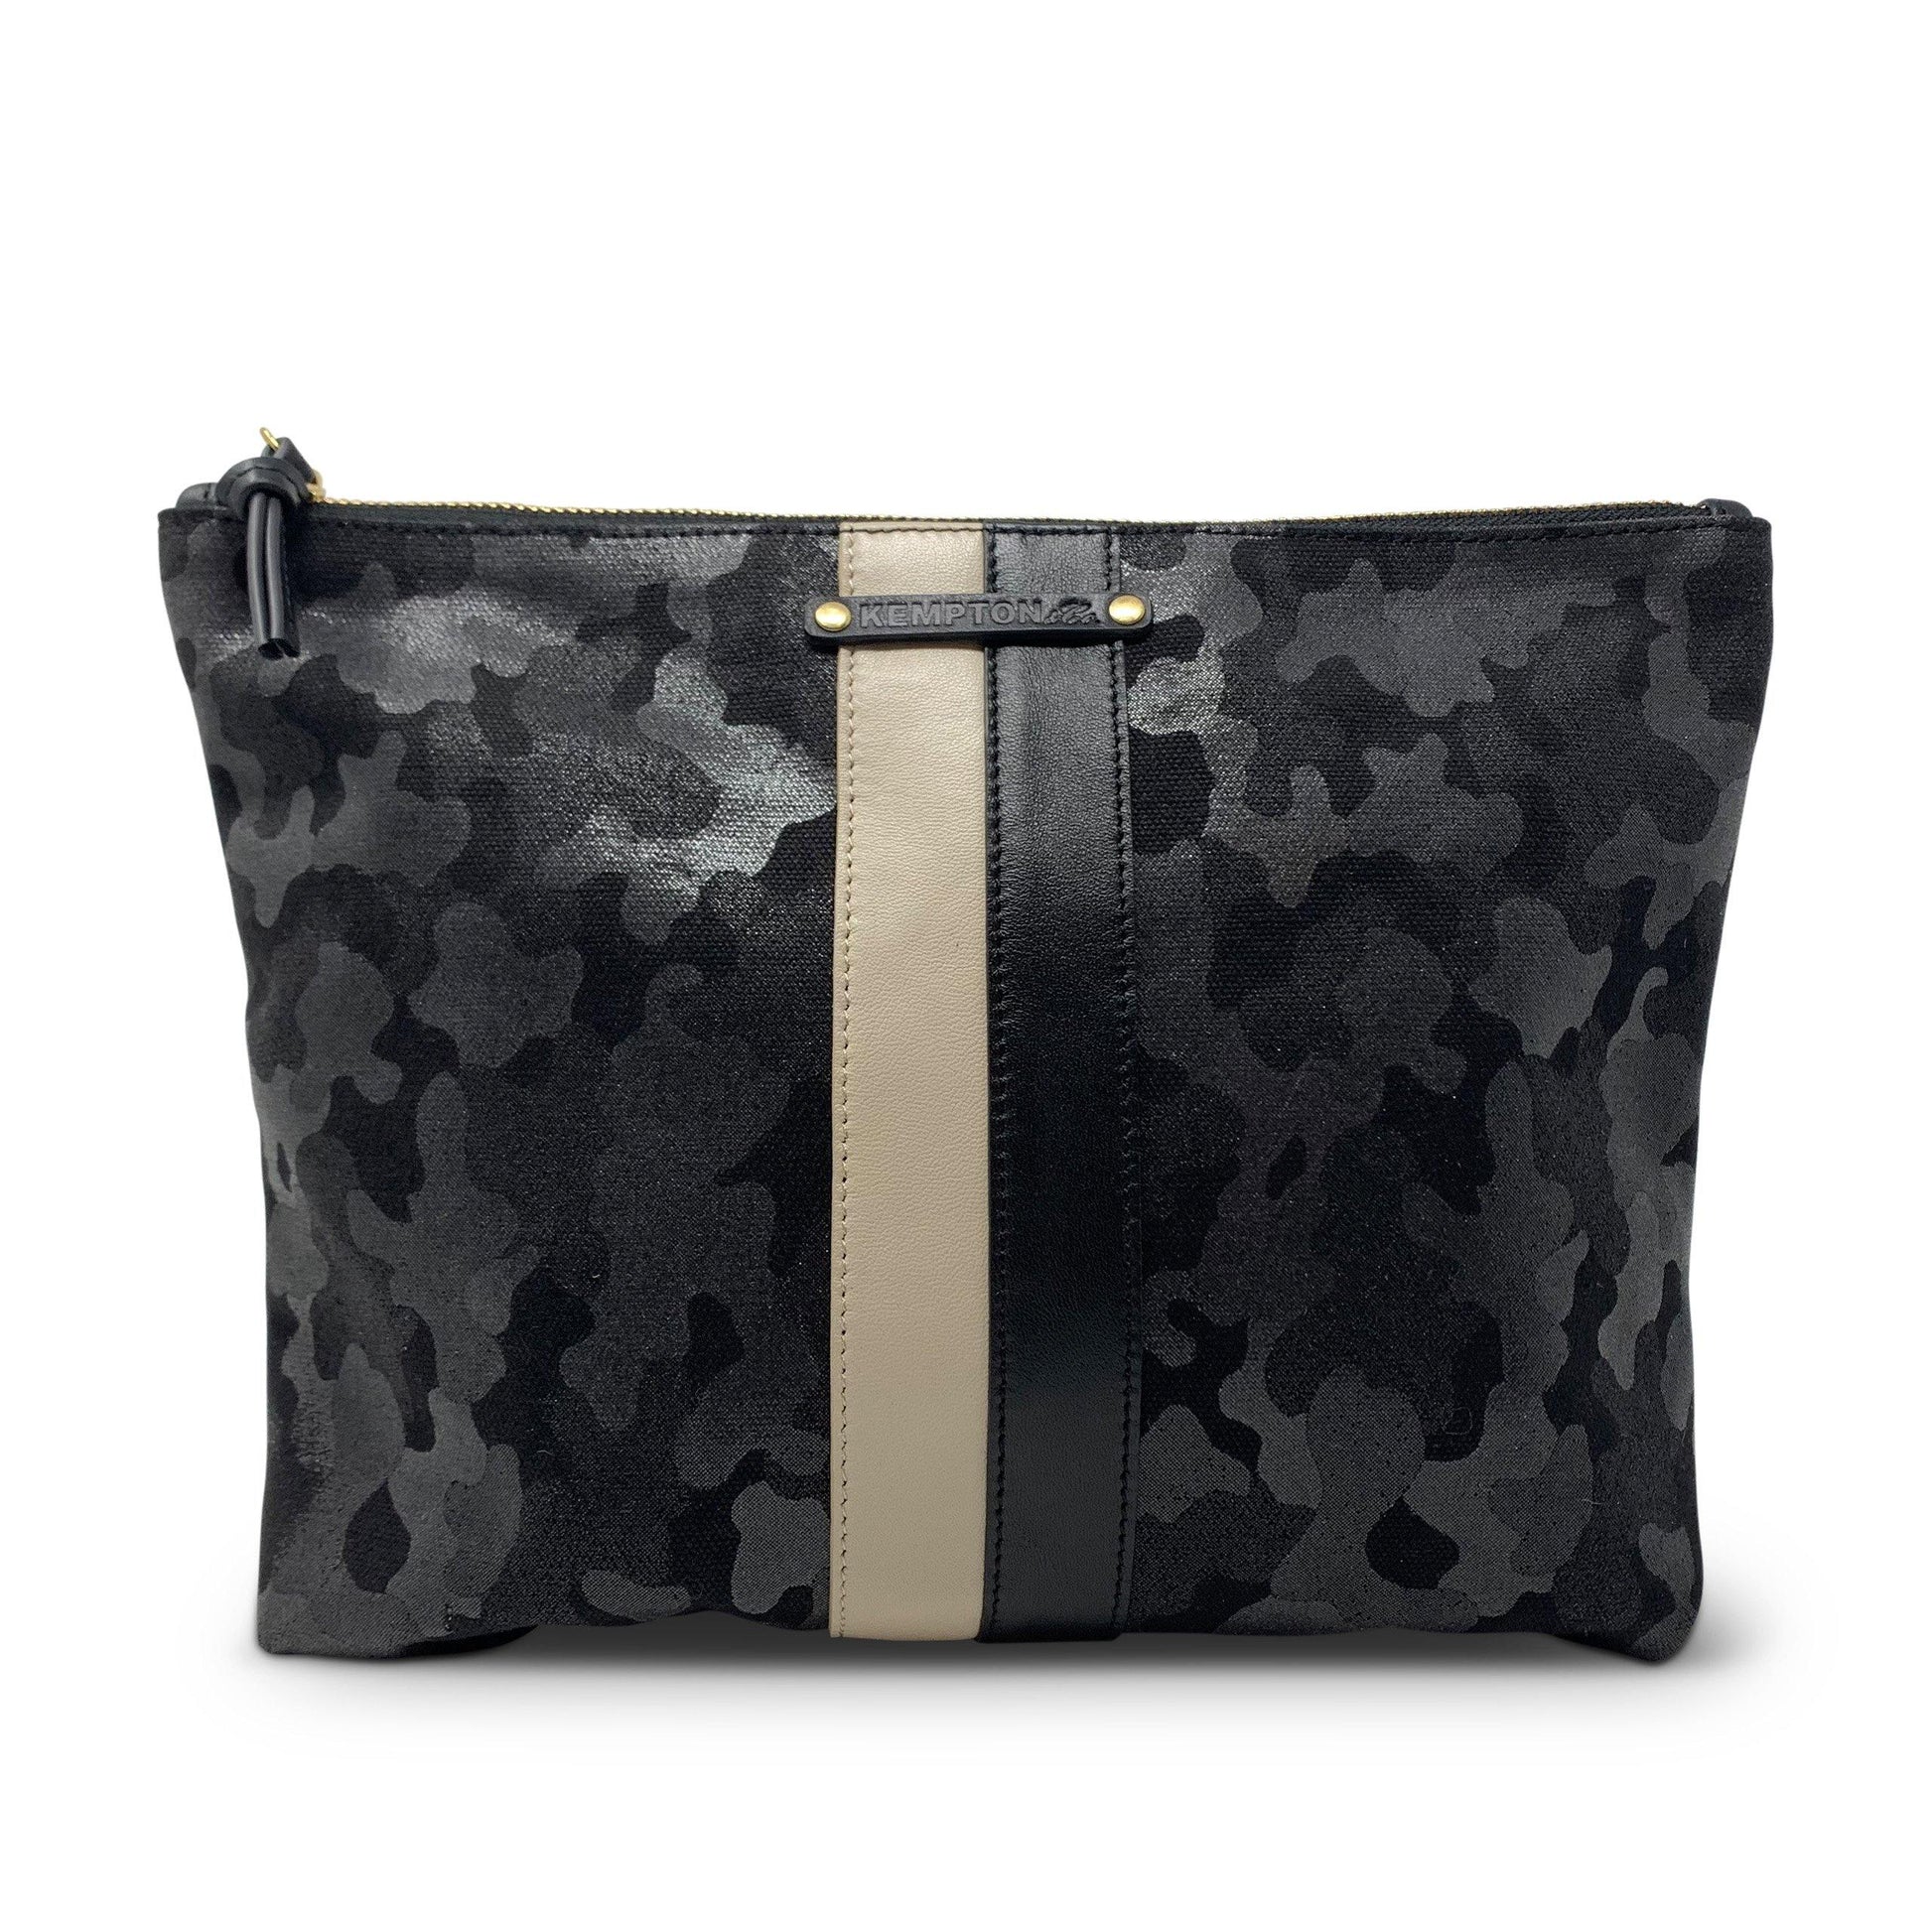 Small Canvas Pouch in Black Camo by Kempton & Co. - Haven